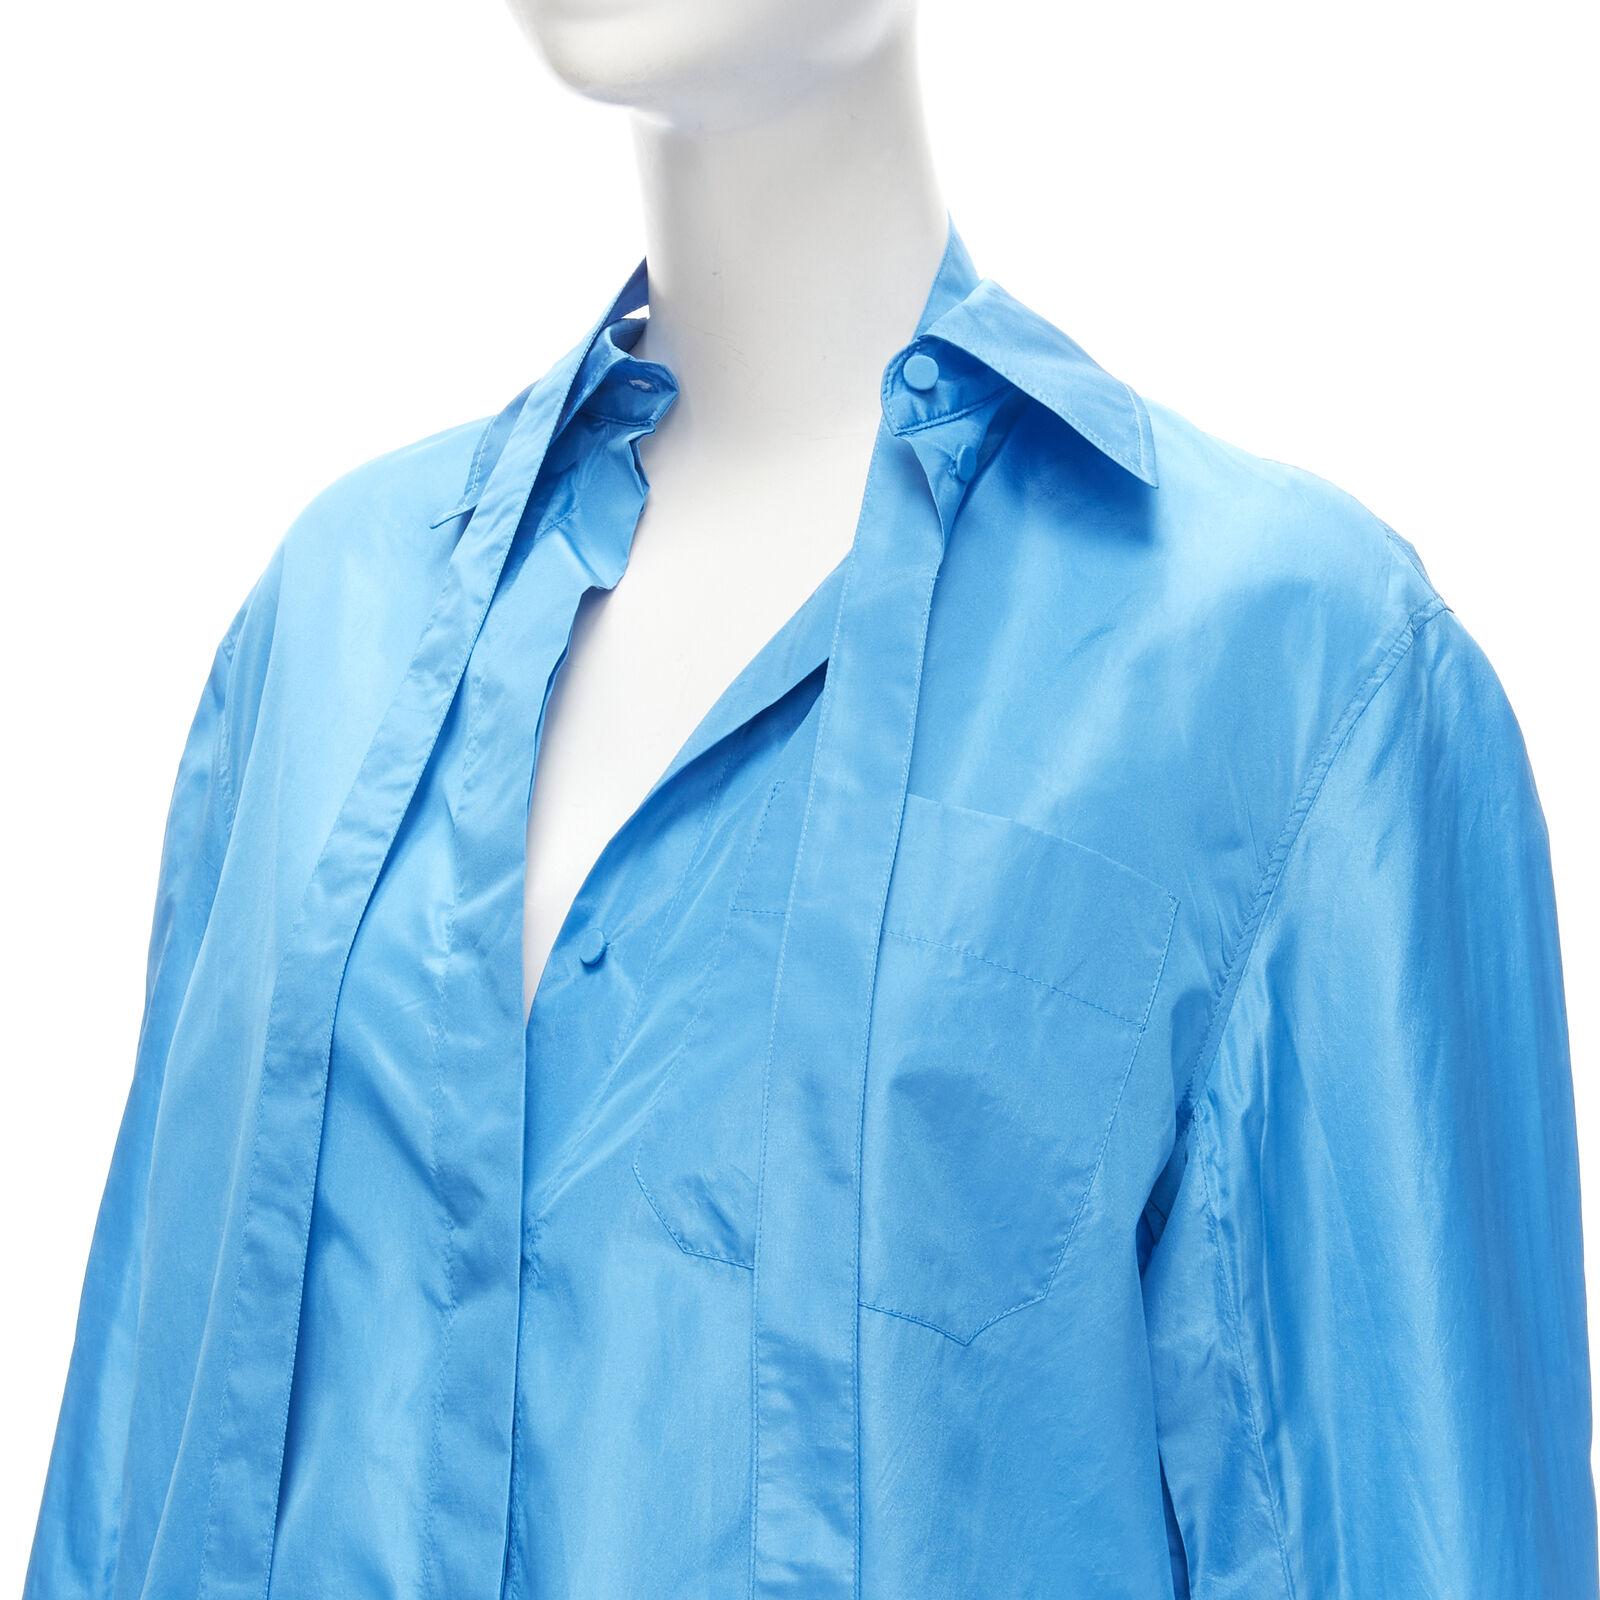 VALENTINO 2022 Runway blue silk tafetta relaxed neck tie oversized shirt IT38 XS
Reference: AAWC/A00266
Brand: Valentino
Designer: Pier Paolo Piccioli
Collection: 2022 - Runway
Material: 100% Silk
Color: Blue
Pattern: Solid
Closure: Button
Made in: